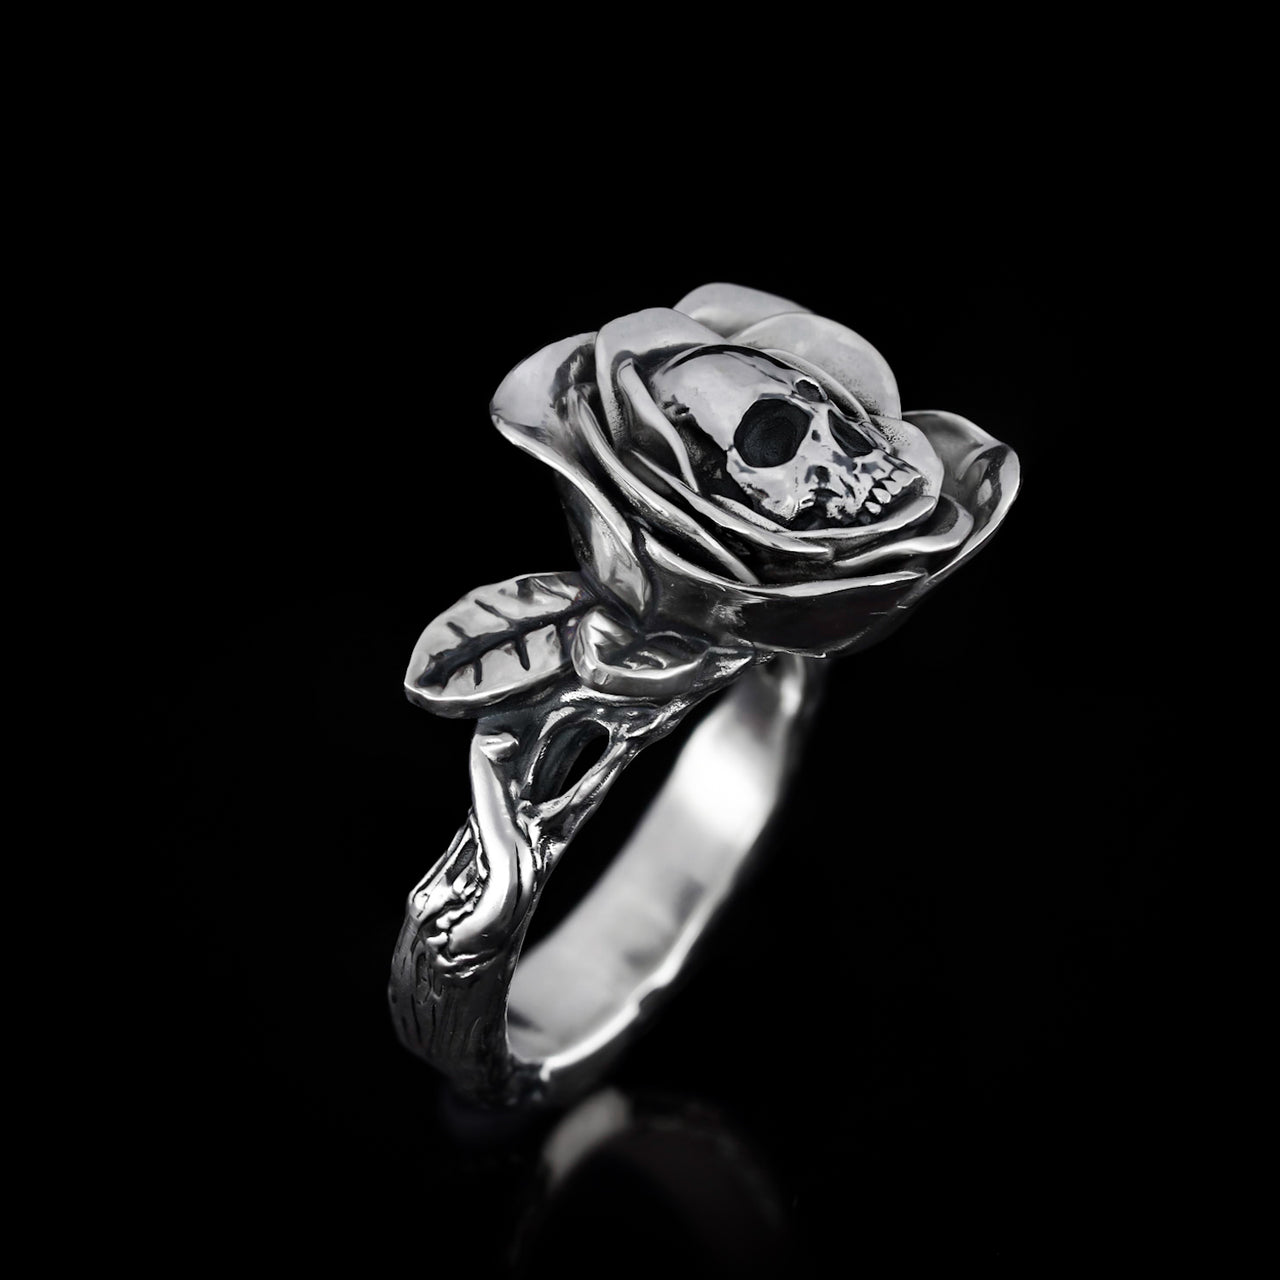 Skull and rose ring in sterling silver on black background - Black Feather Design